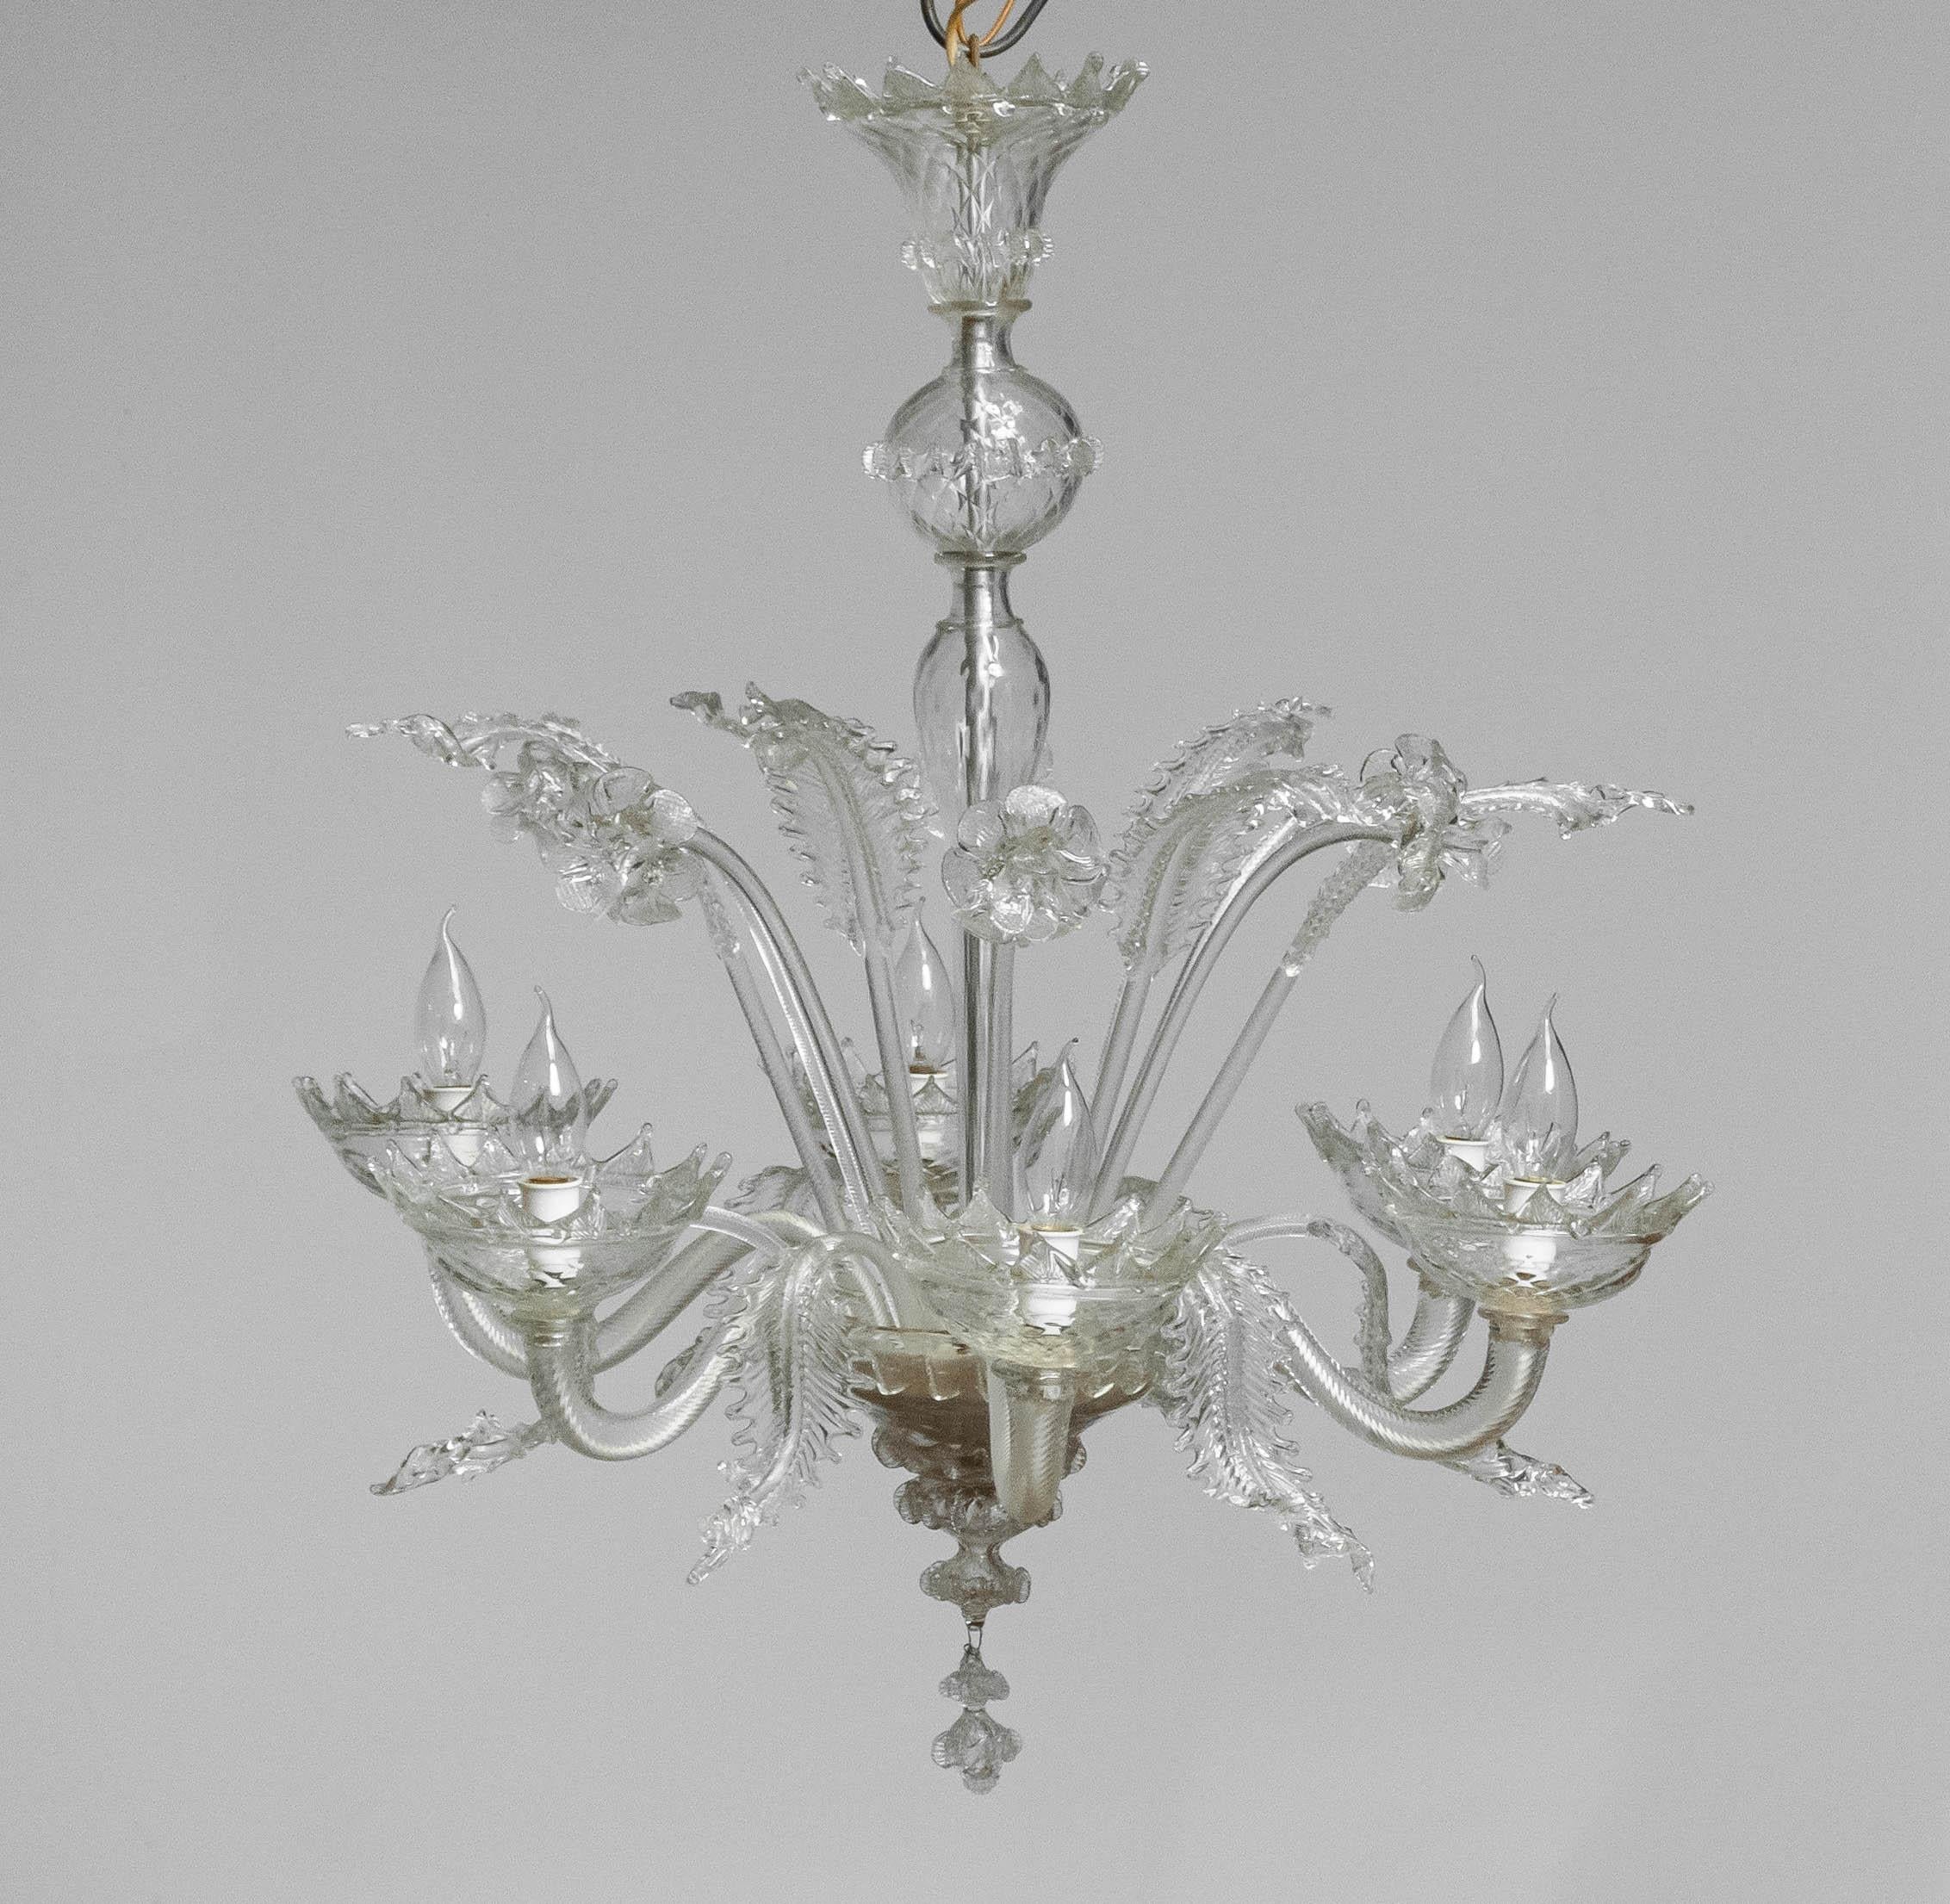 1940's Large Clear Art Glass Murano Barrochi Chandelier by Barovier & Toso Italy For Sale 1